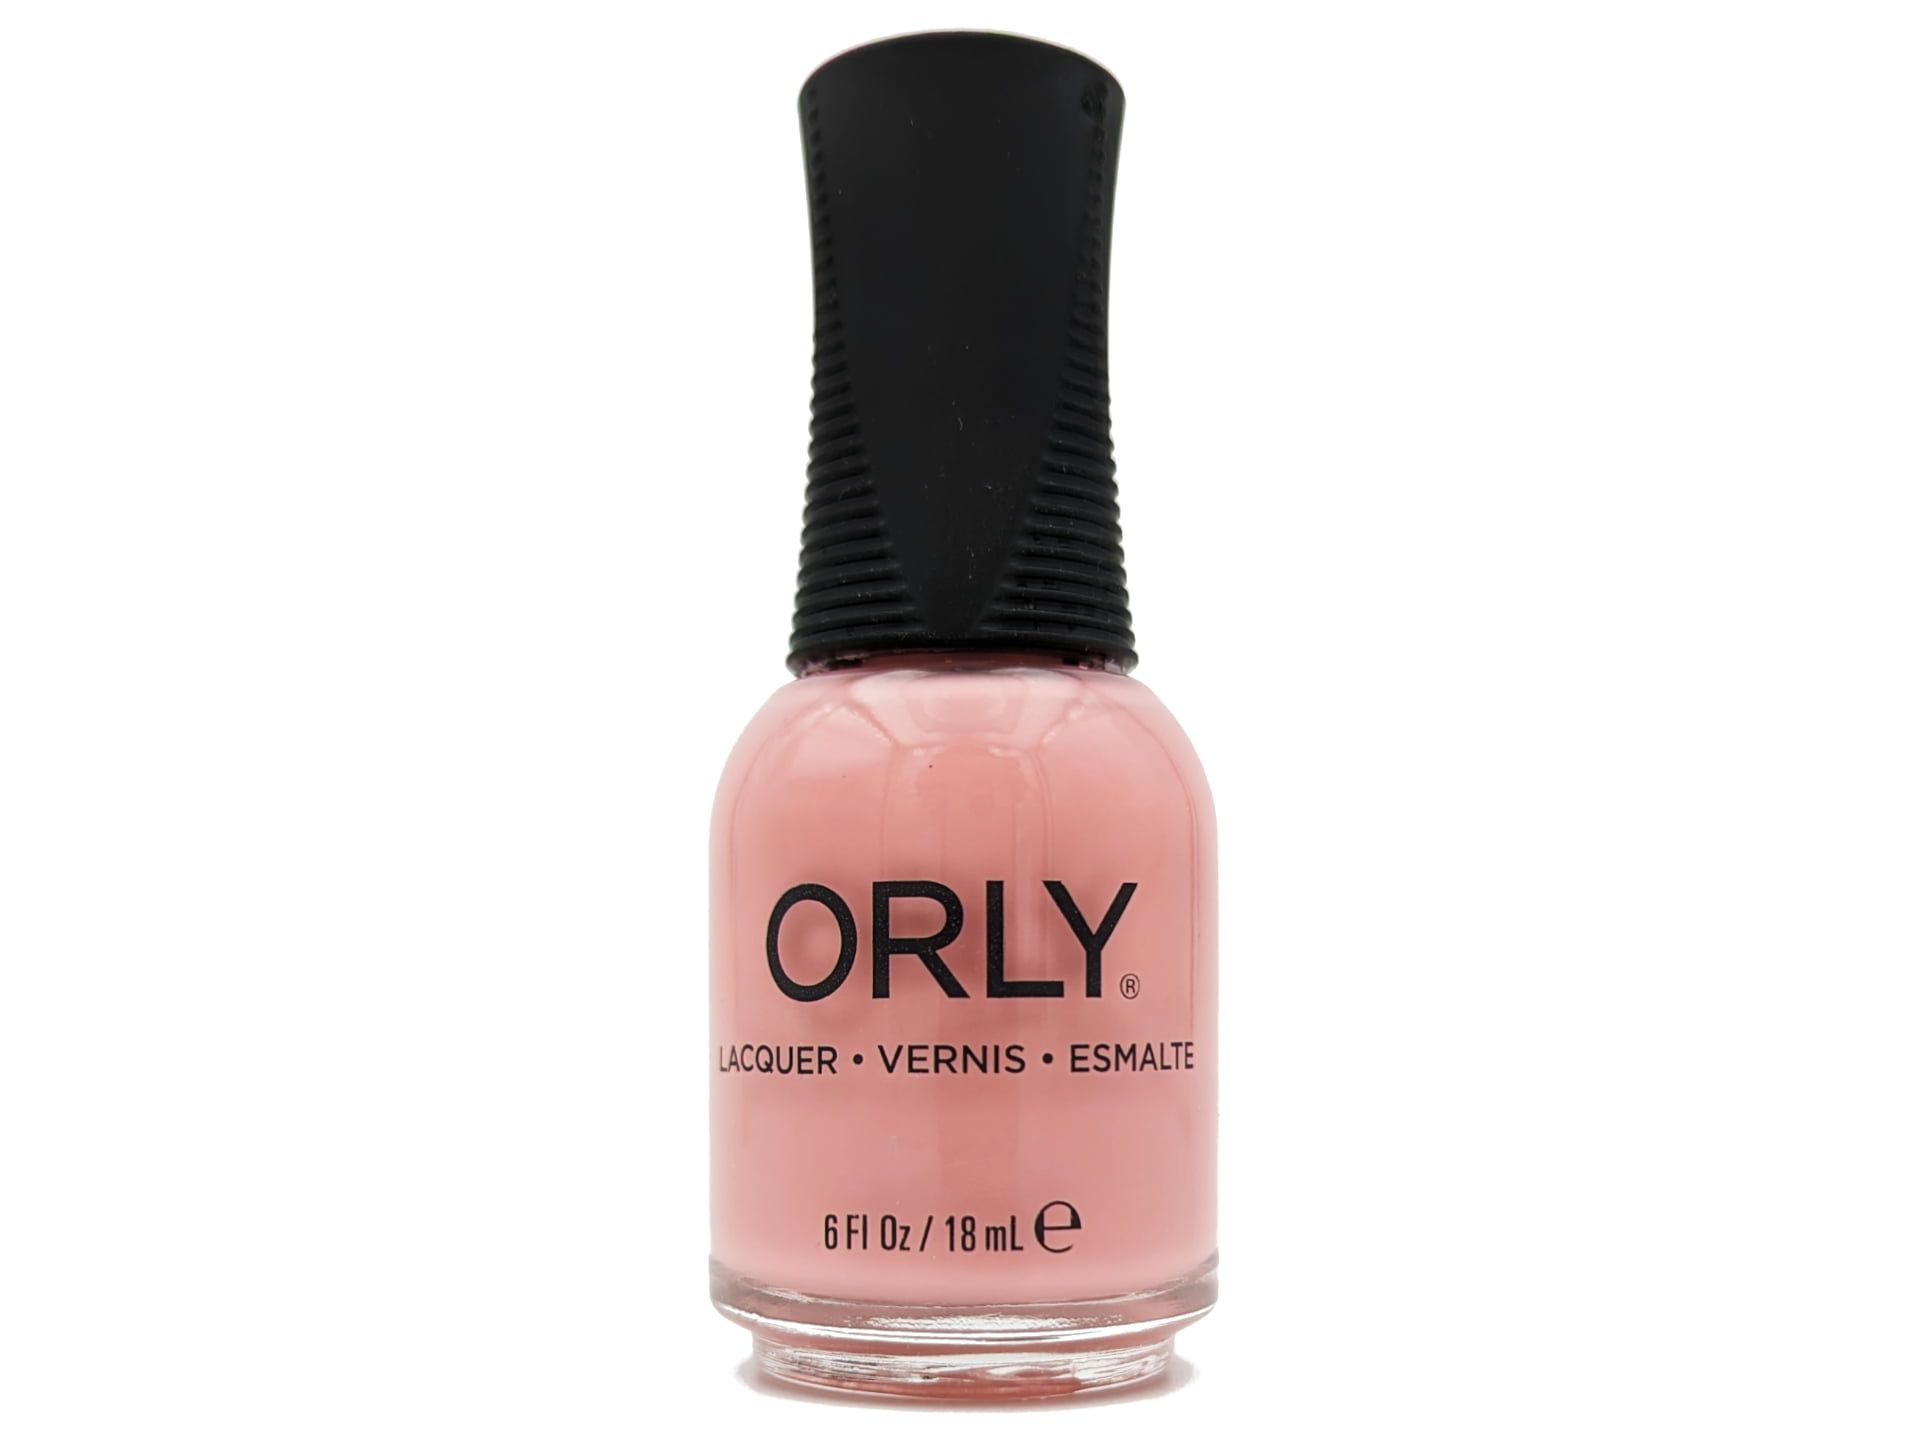 Orly Nagellack (Coming up Roses)